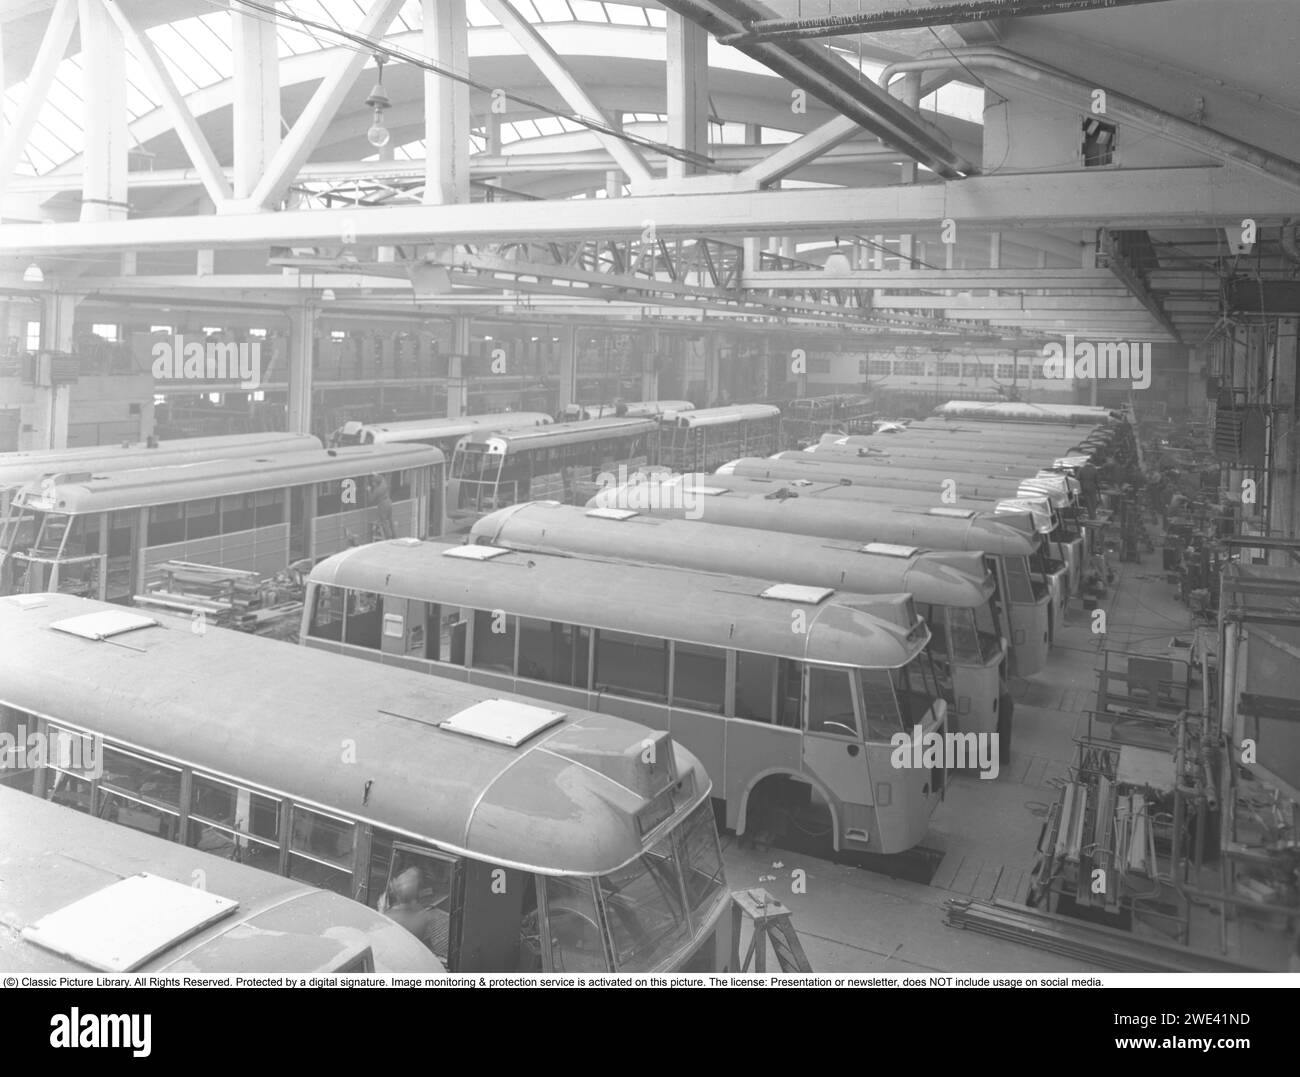 The company Hägglund and sons in Örnsköldsvik. At this time in the 1940s, the company went by the name carpentry factory. The company manufactures buses, trams, etc. The picture taken in the large assembly hall in 1949. The company is now owned by BAE Systems. Kristoffersson ref 238A-25 Stock Photo